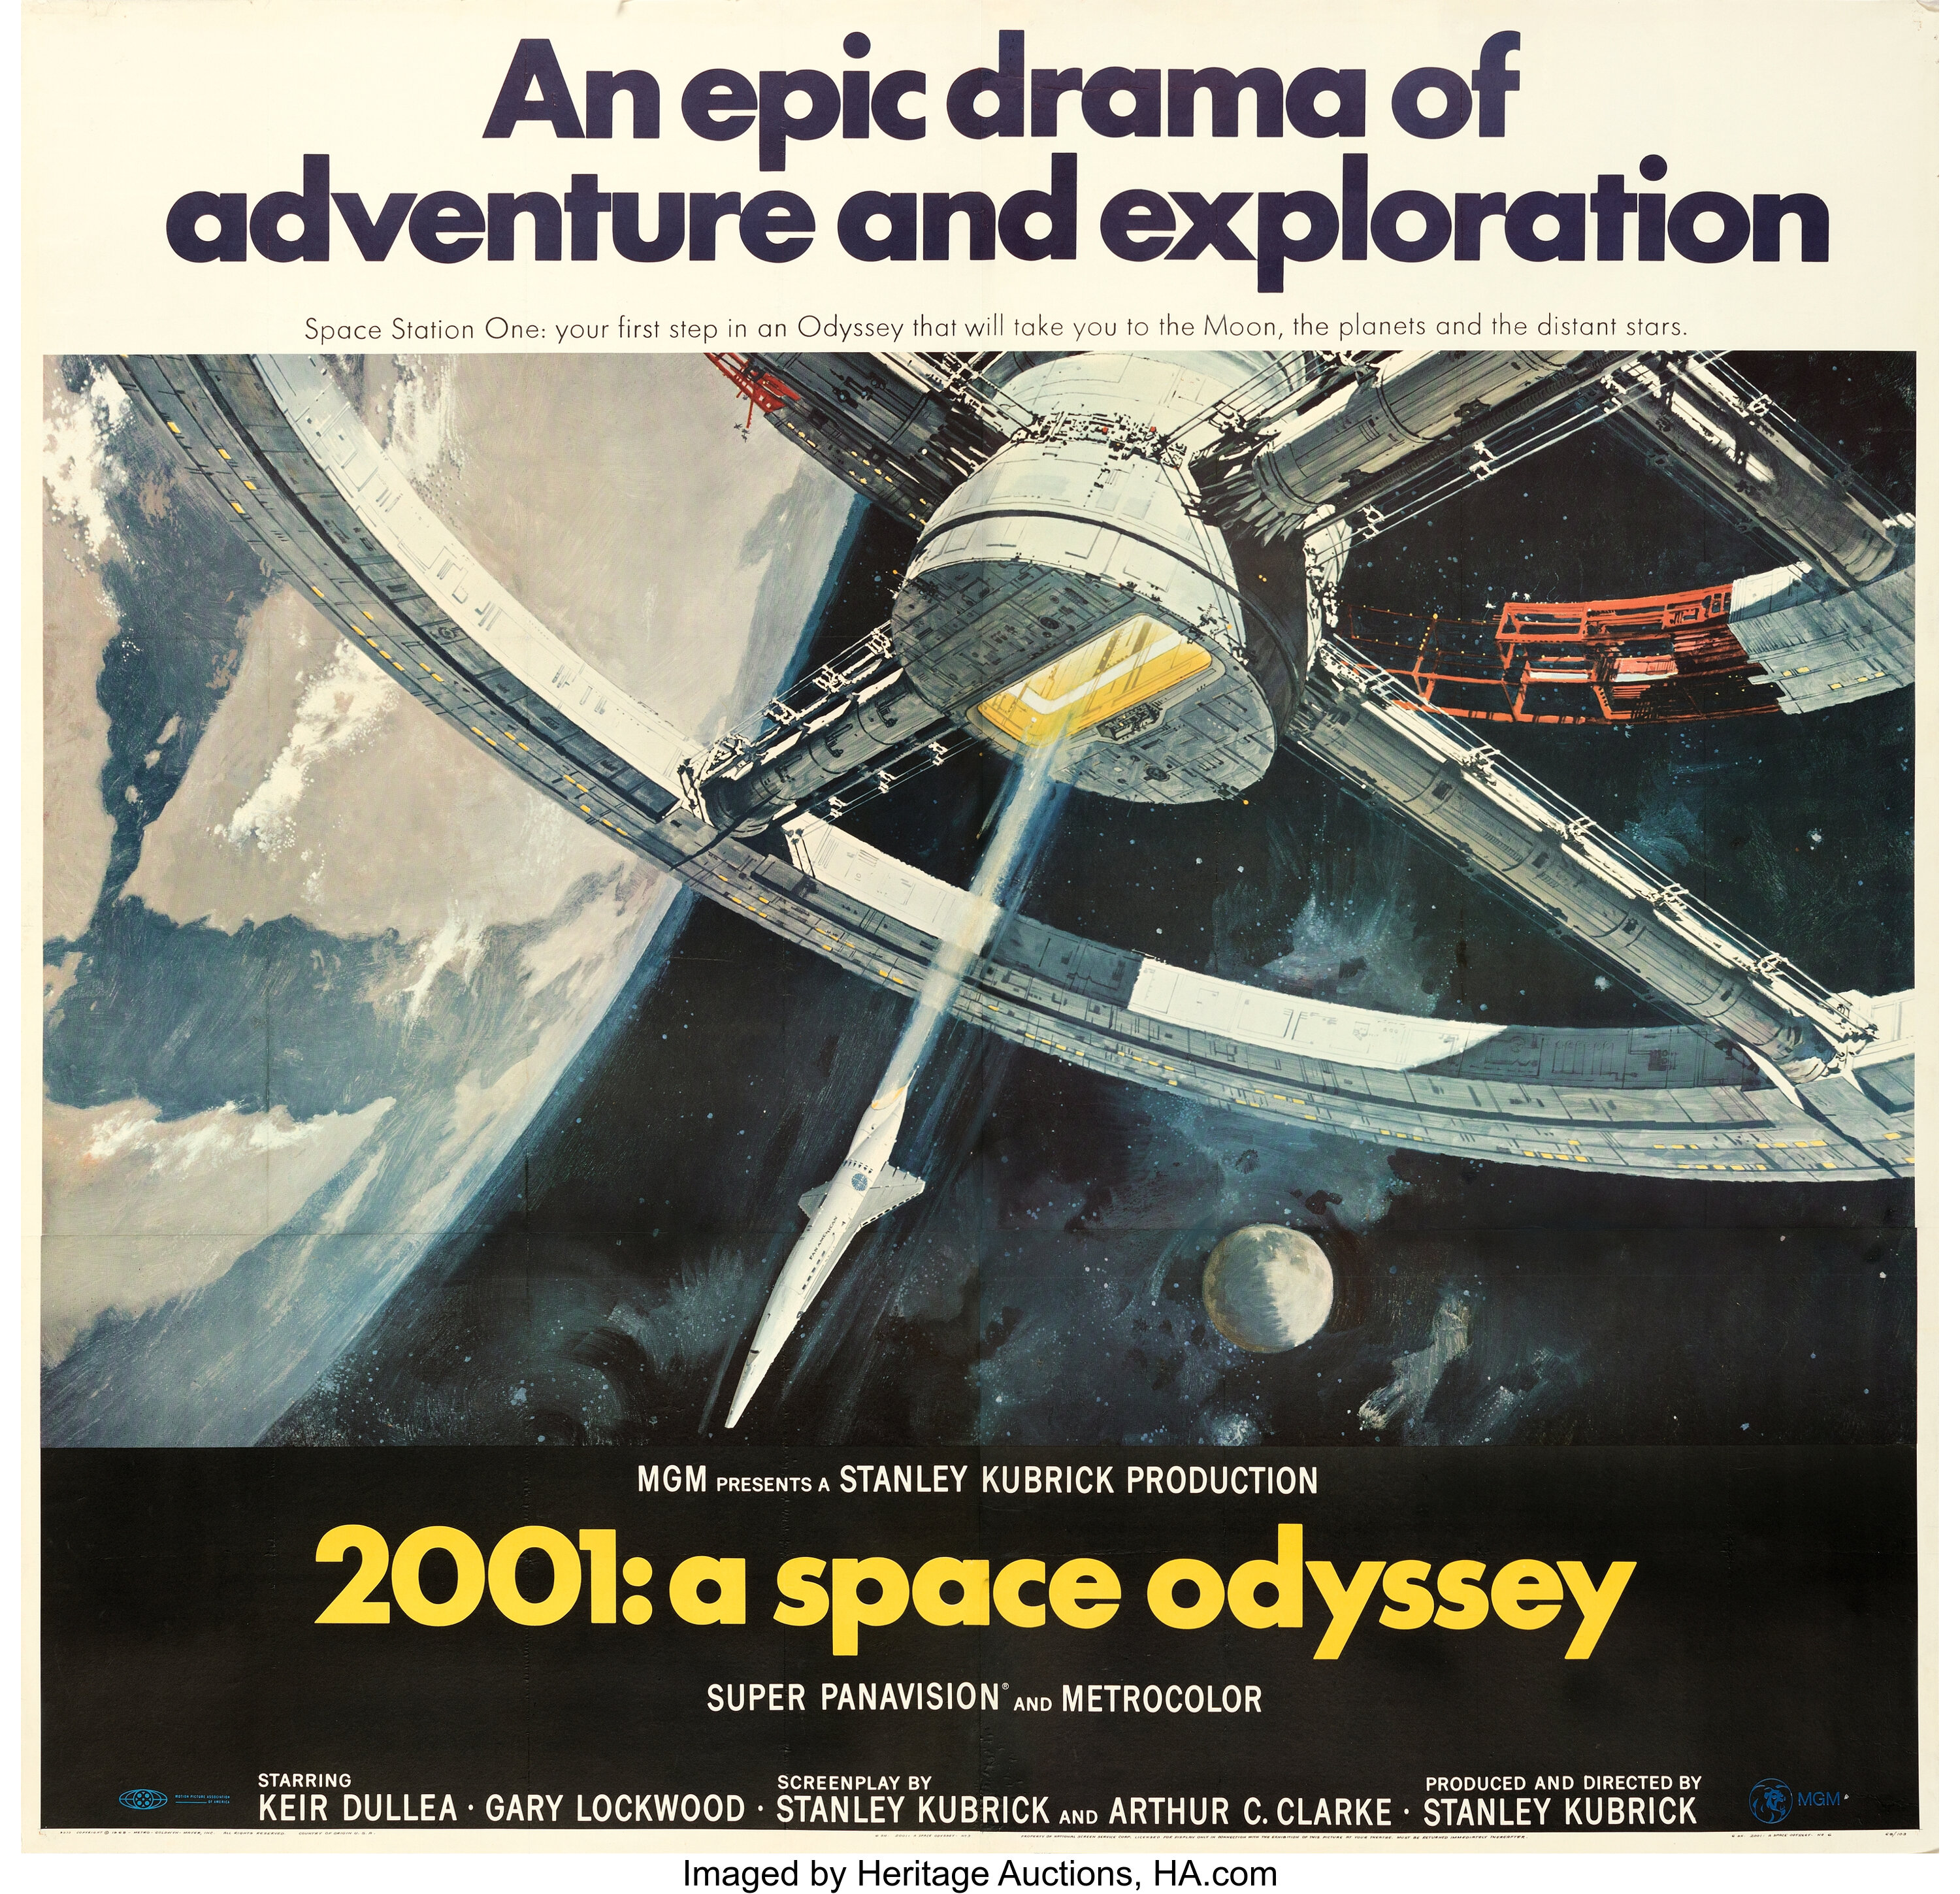 2001 A Space Odyssey And Other Lot Mgm 1968 Very Fine On Linen Lot 88163 Heritage Auctions 8119